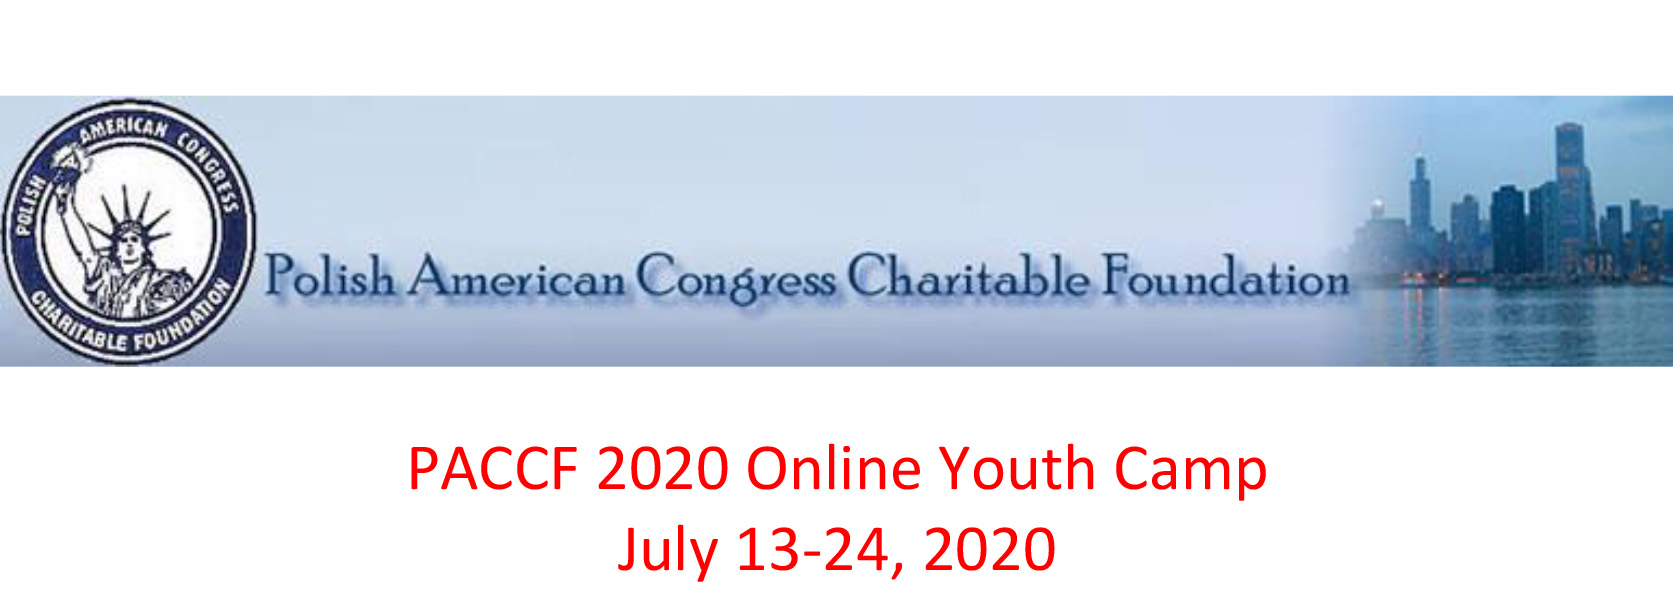 PACCF 2020 Online Youth Camp Registration